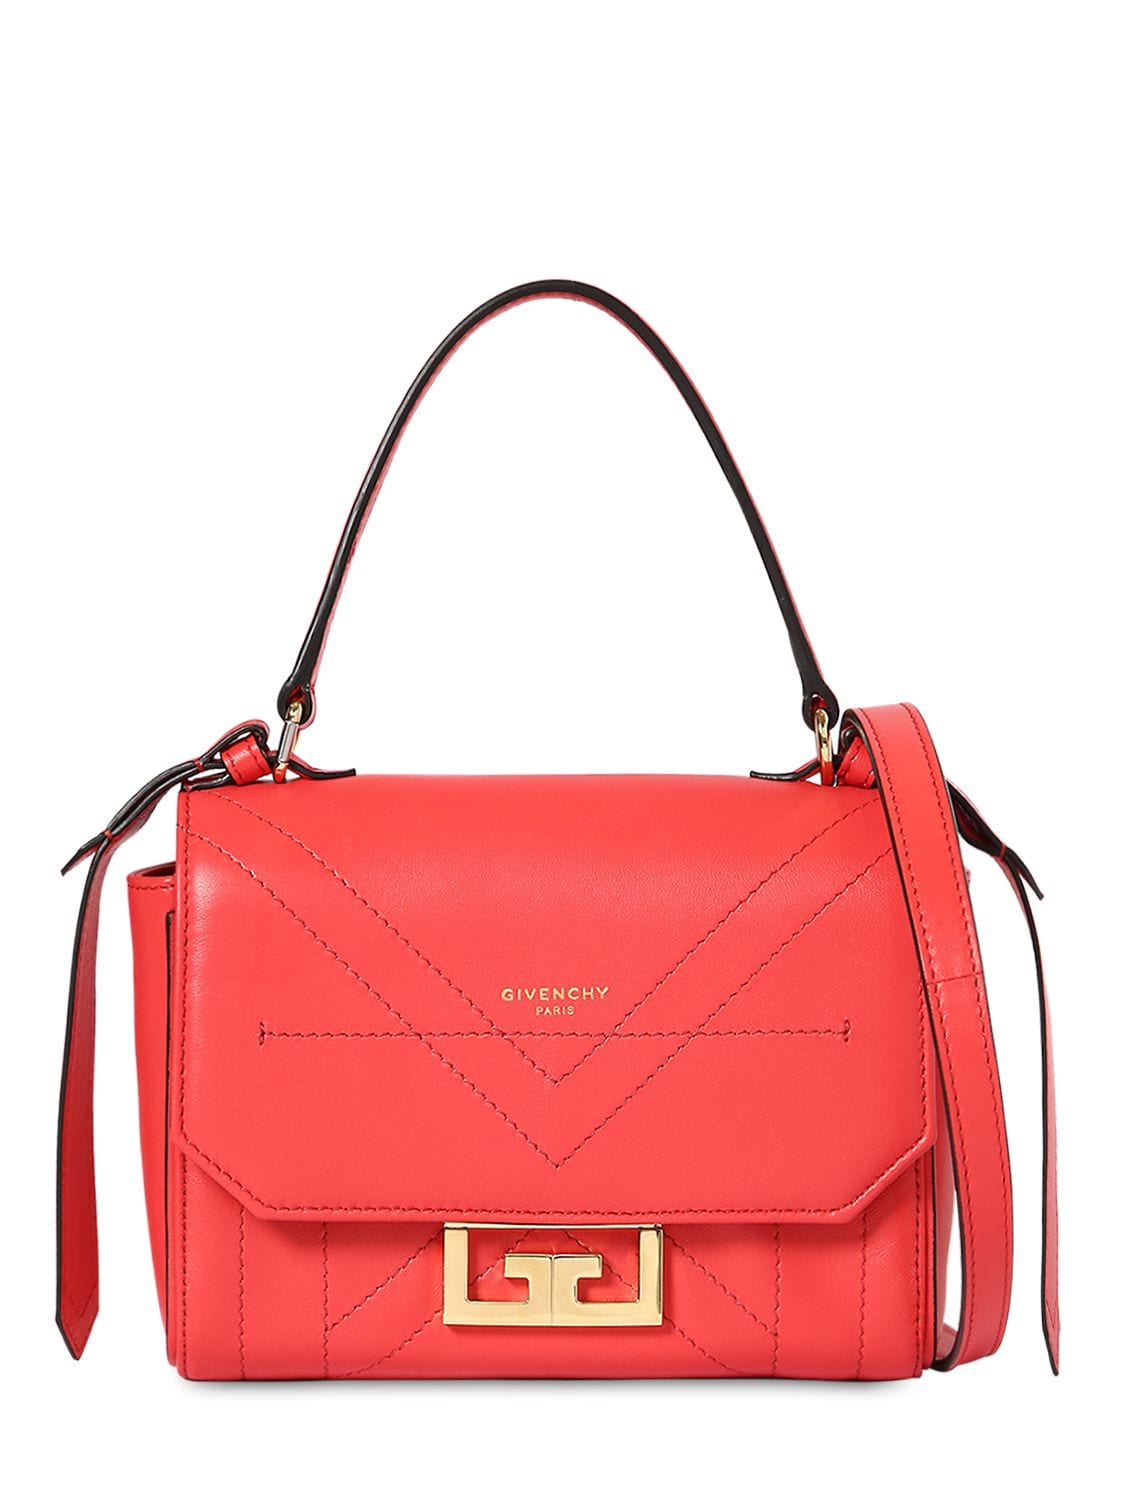 GIVENCHY MINI EDEN SMOOTH LEATHER BAG,70ID1A006-NJY50